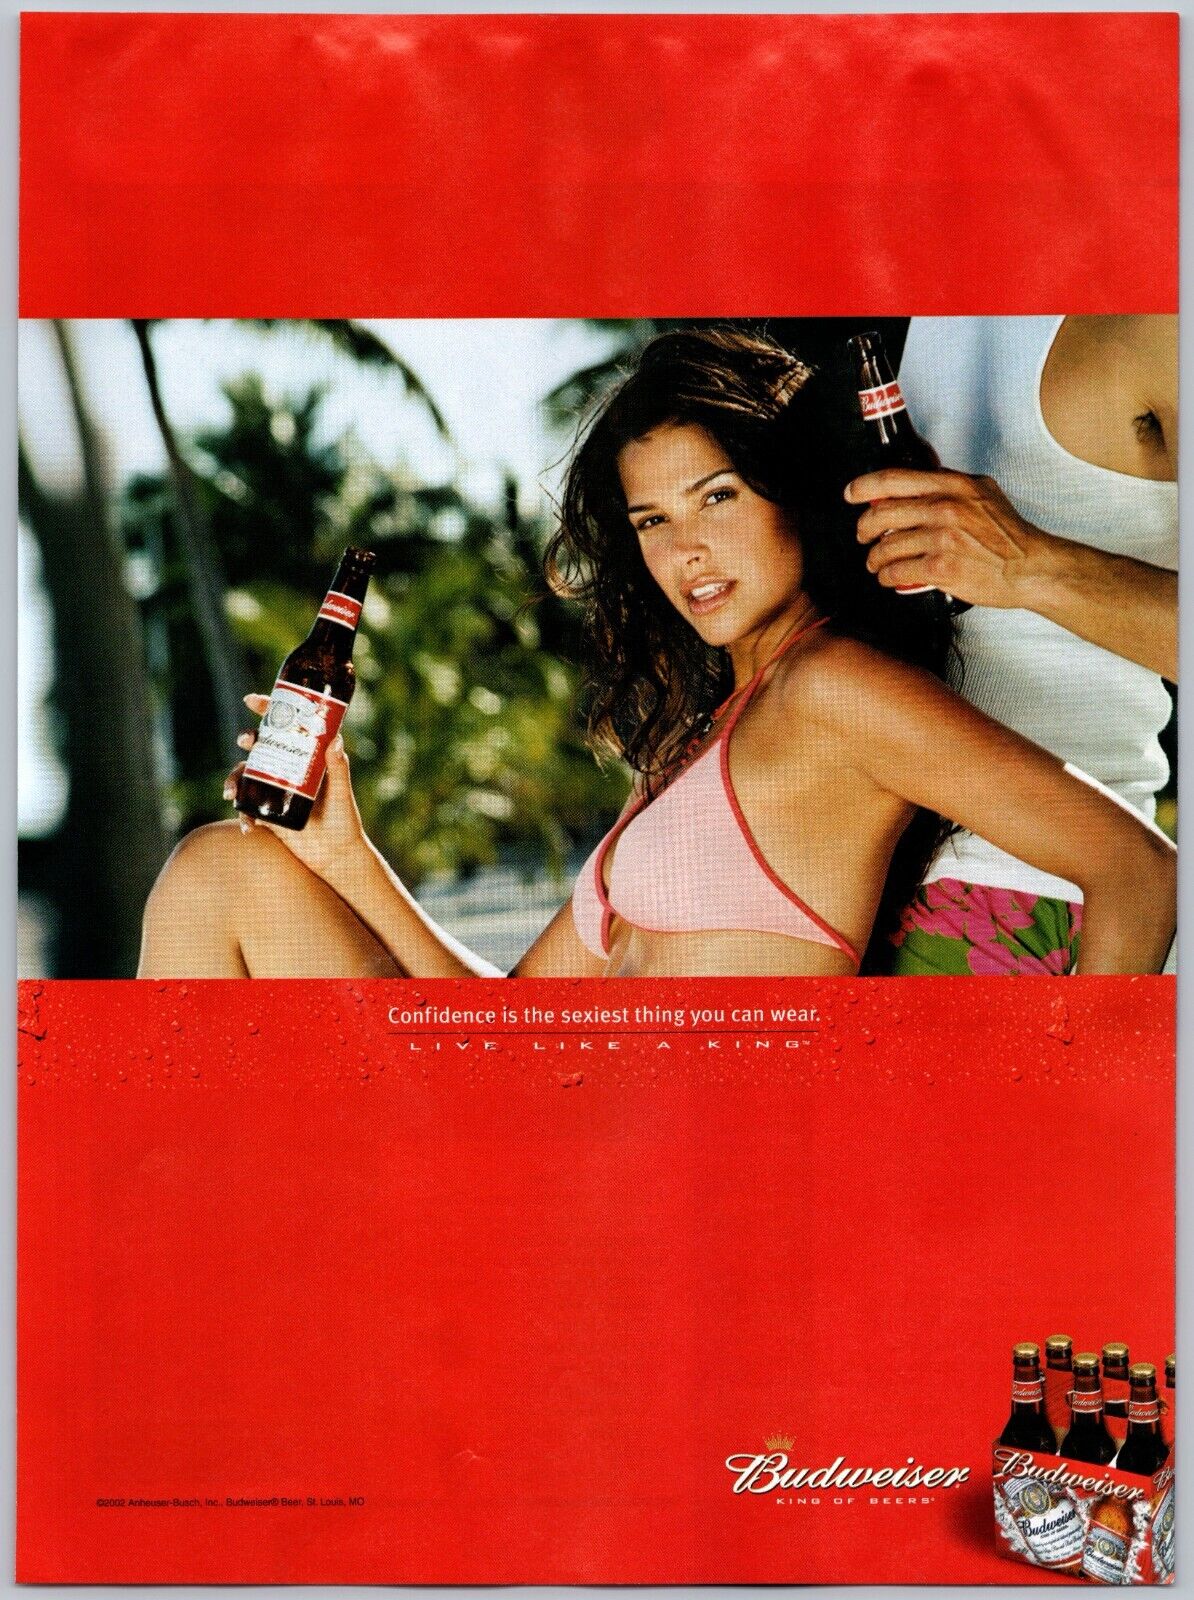 Budweiser Confidence The Sexiest Thing You Can Wear Sep 2002 Full Page Print Ad